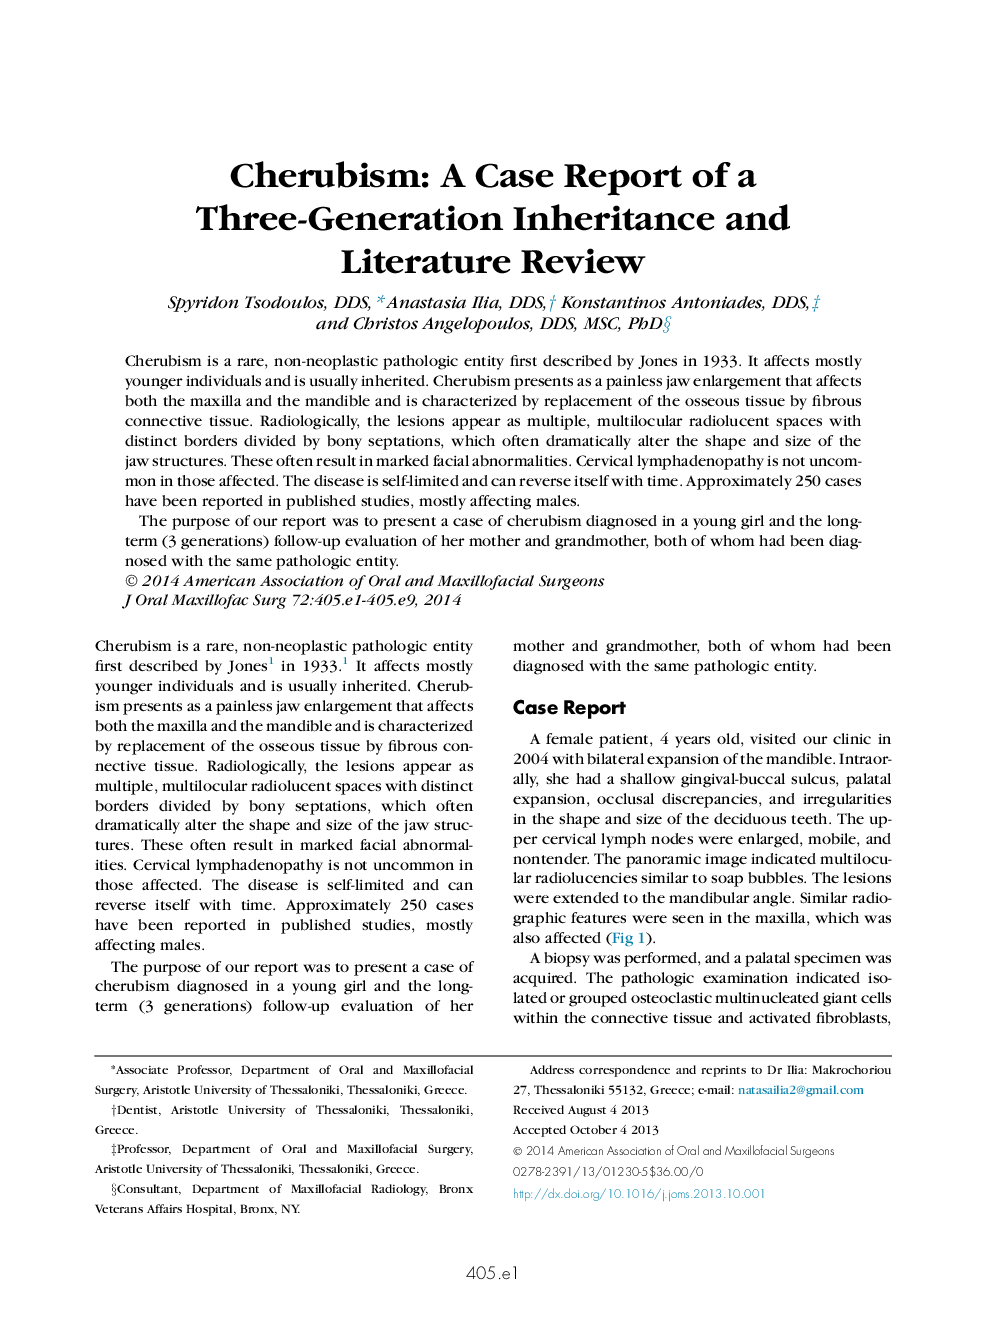 Cherubism: A Case Report of a Three-Generation Inheritance and Literature Review